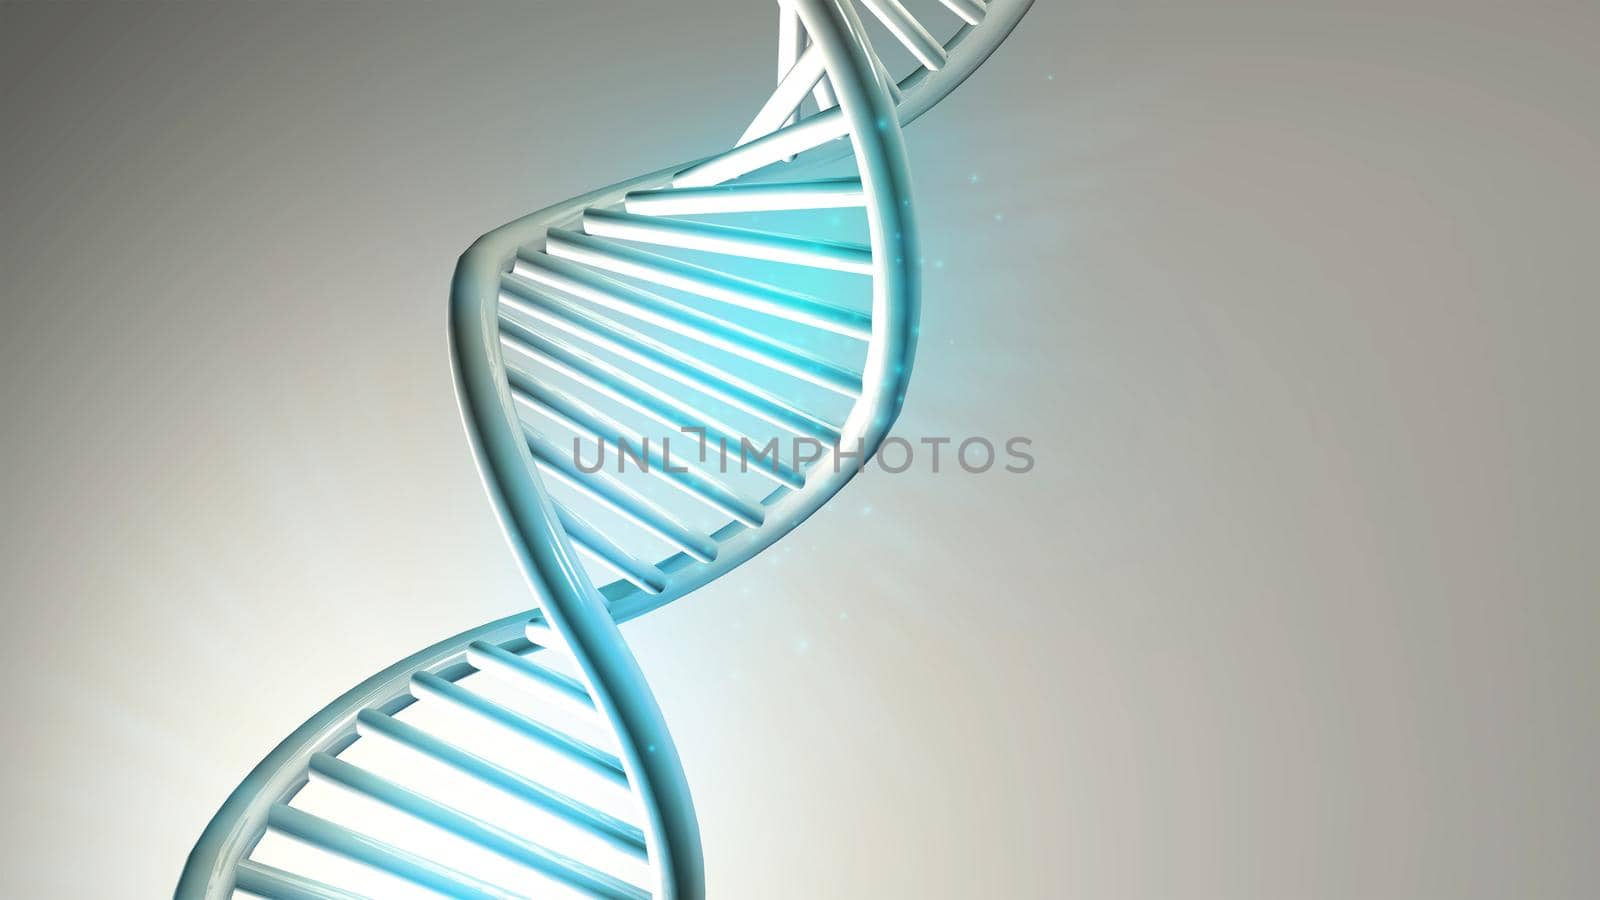 Model of abstract DNA double helix on a light gray background. 3D render.